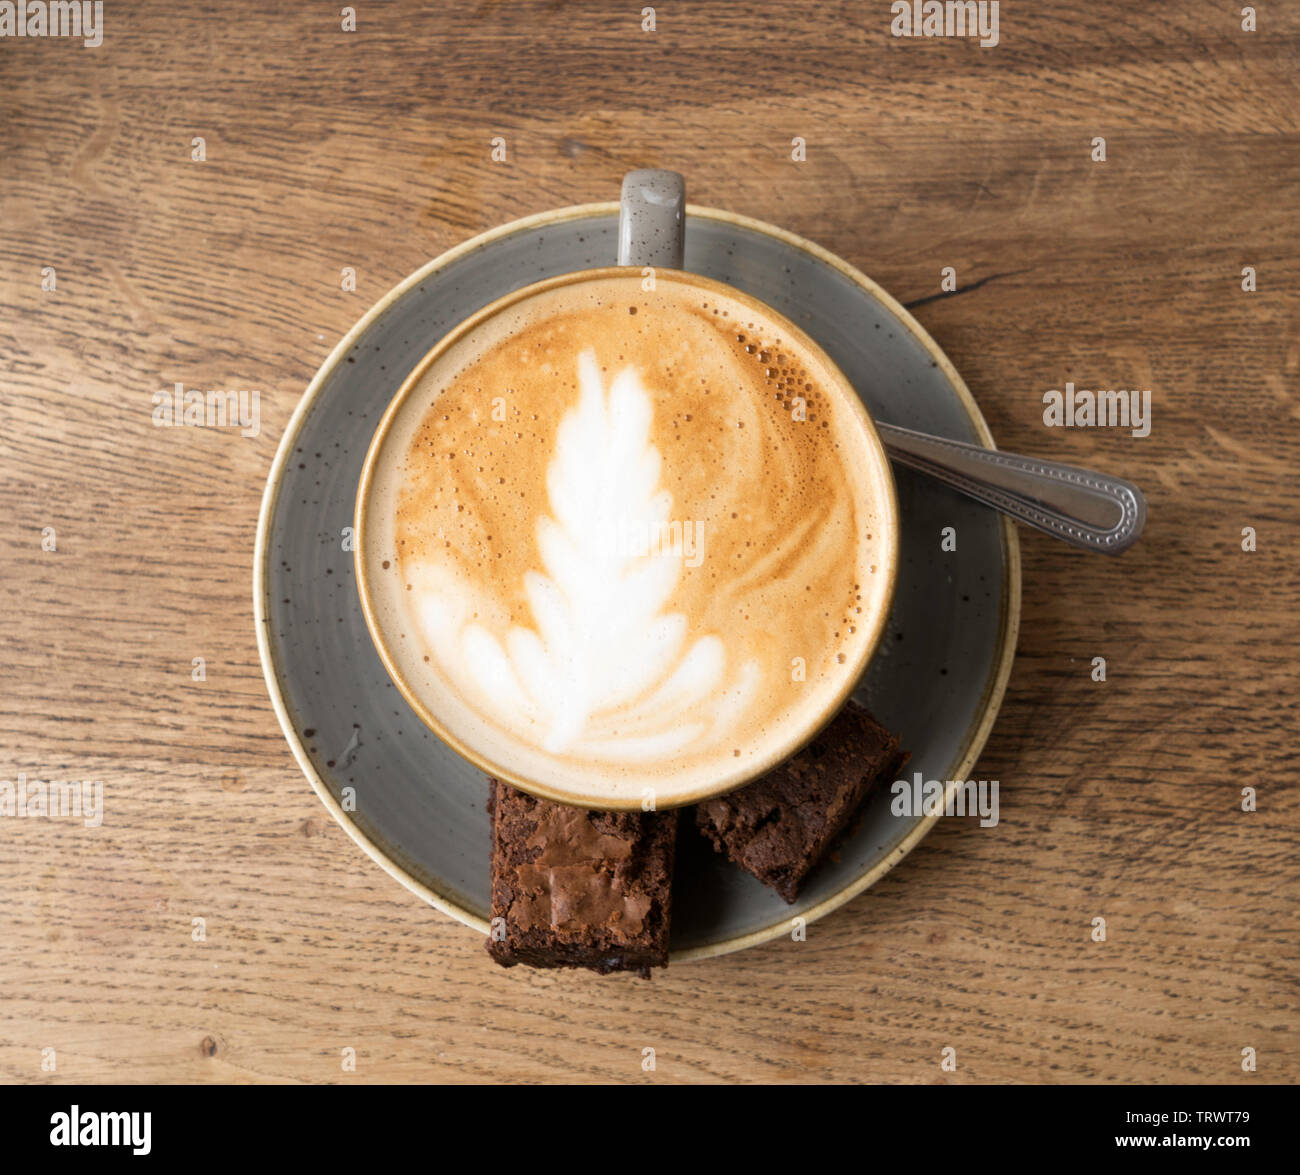 A cup of flat white coffee with chocolate brownies and a spoon on a saucer against a wood effect background, England, UK Stock Photo